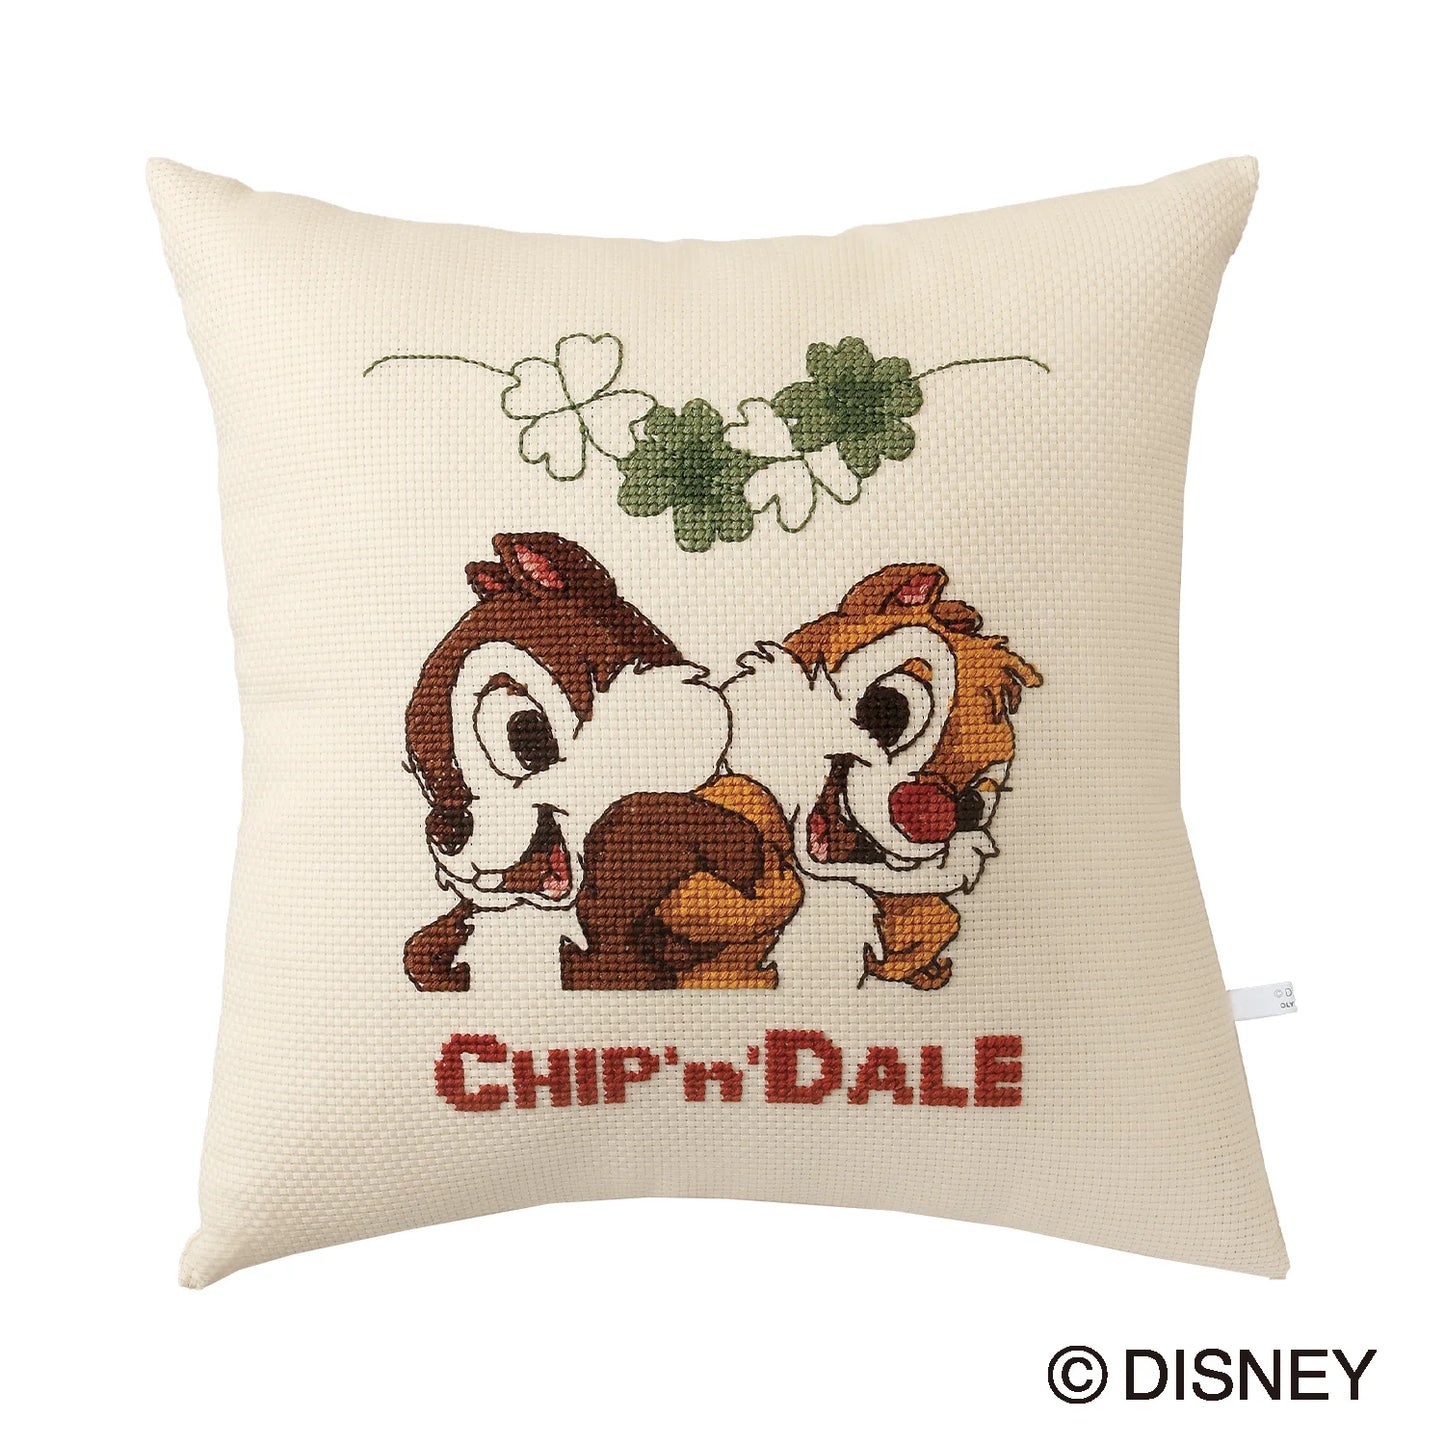  Chip & Dale embroidered cushion cover 